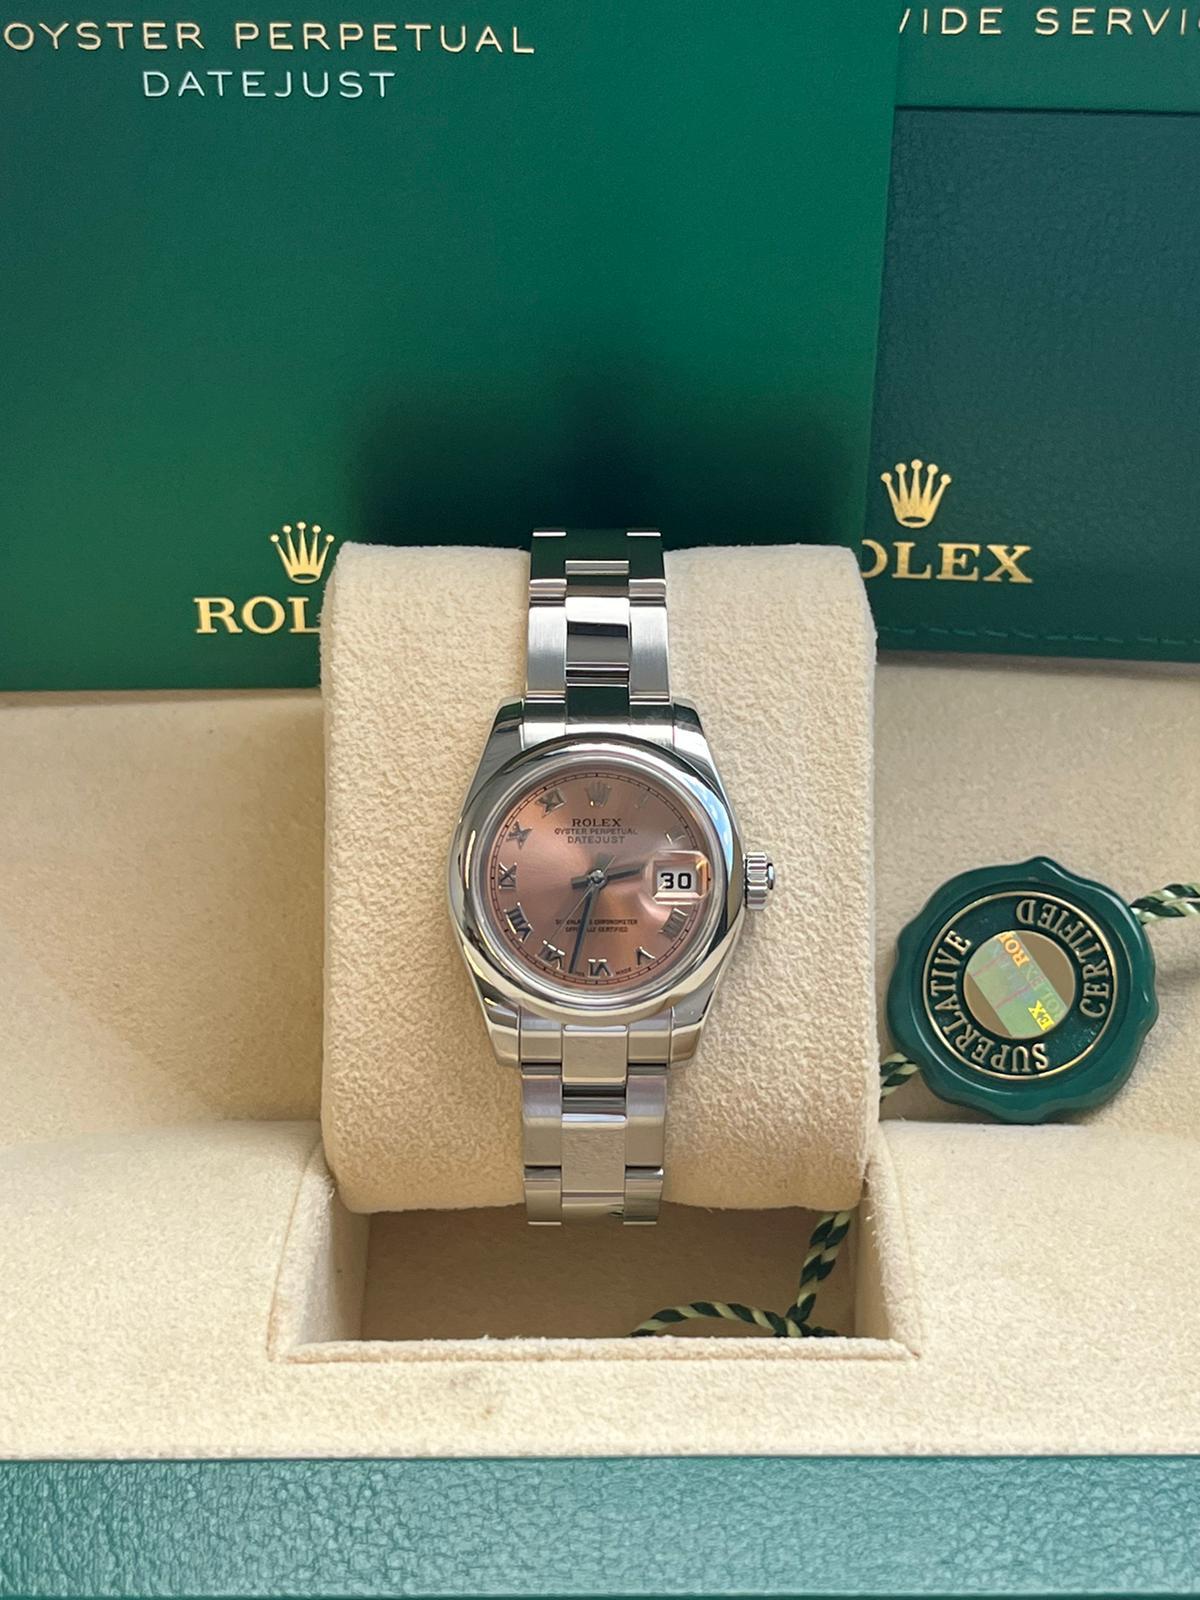 Rolex Lady-Datejust 26mm Automatic Pink Roman Dial Steel Oyster Watch 179160 5